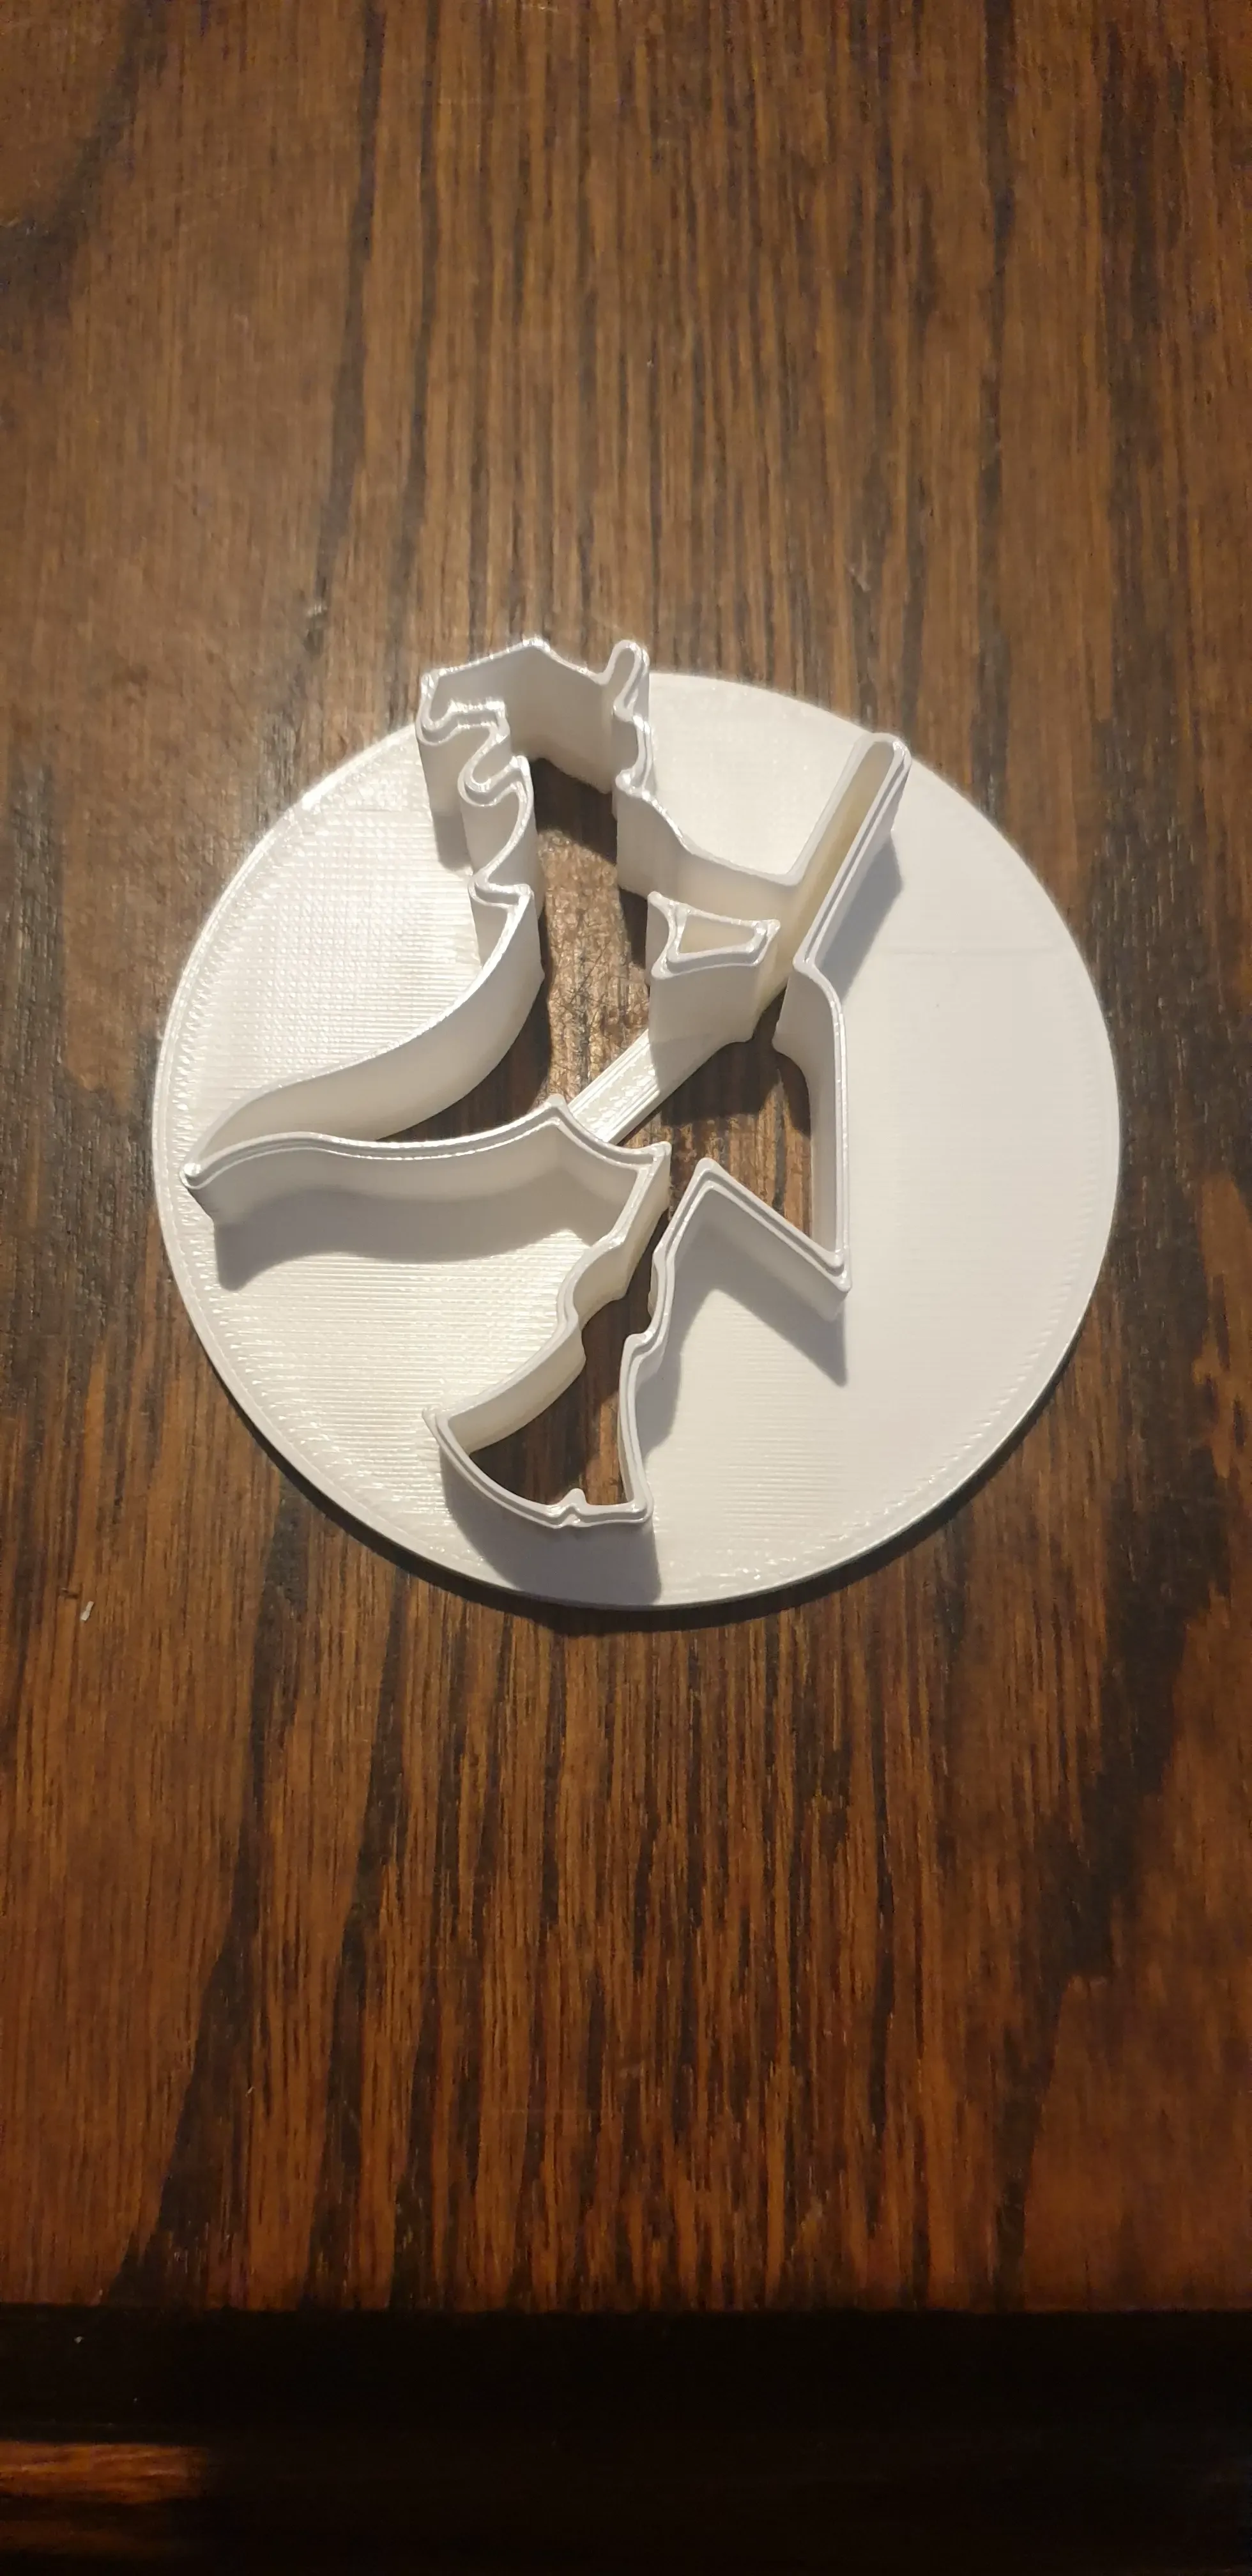 Witch Cookie Cutter